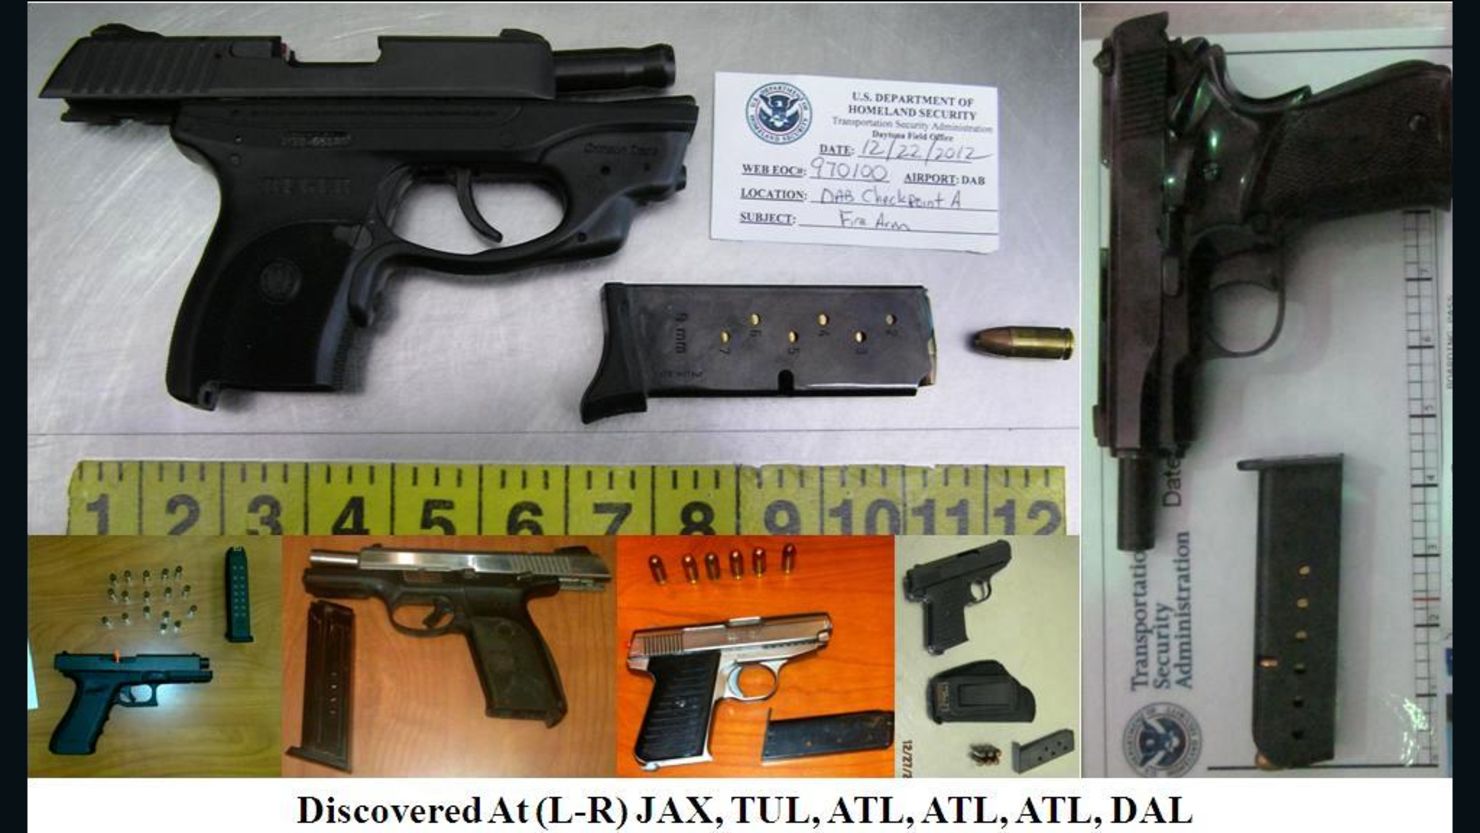 In 2012 more than 1,500 firearms were discovered by screeners at airport checkpoints, TSA spokesman David Castelveter said.